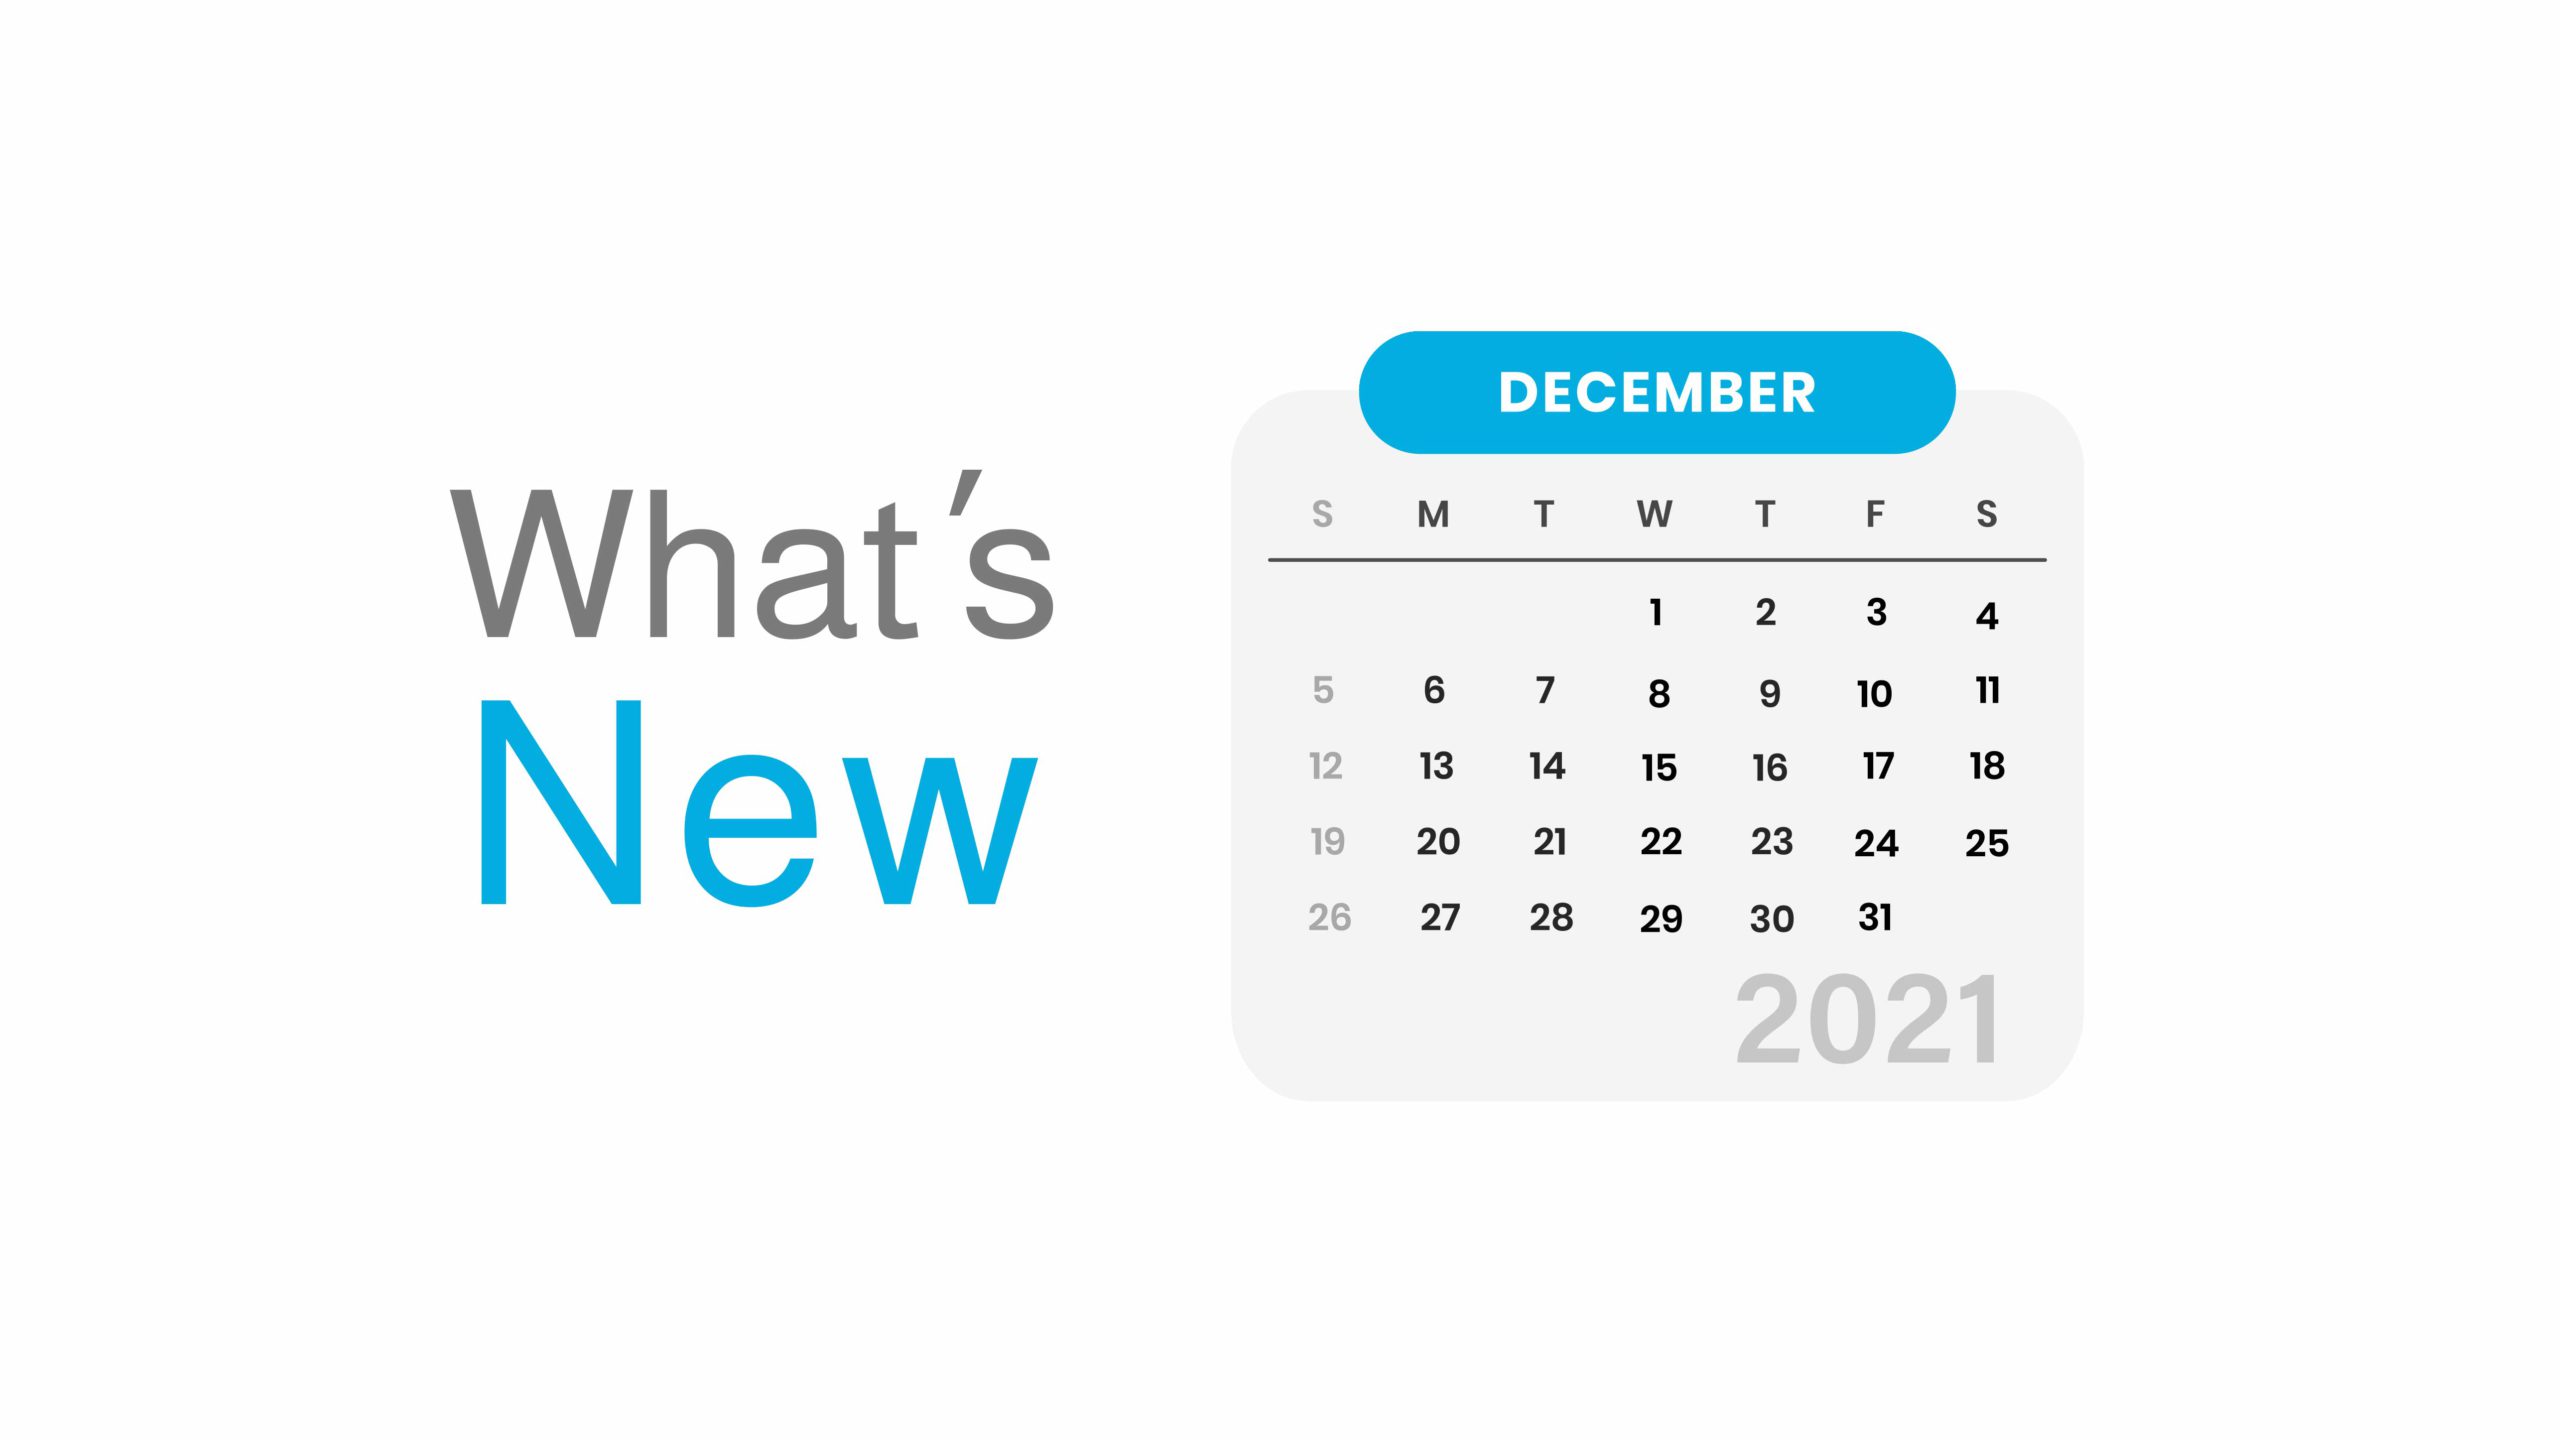 December 2021 Updates: More than 10 Features Improve Your Work